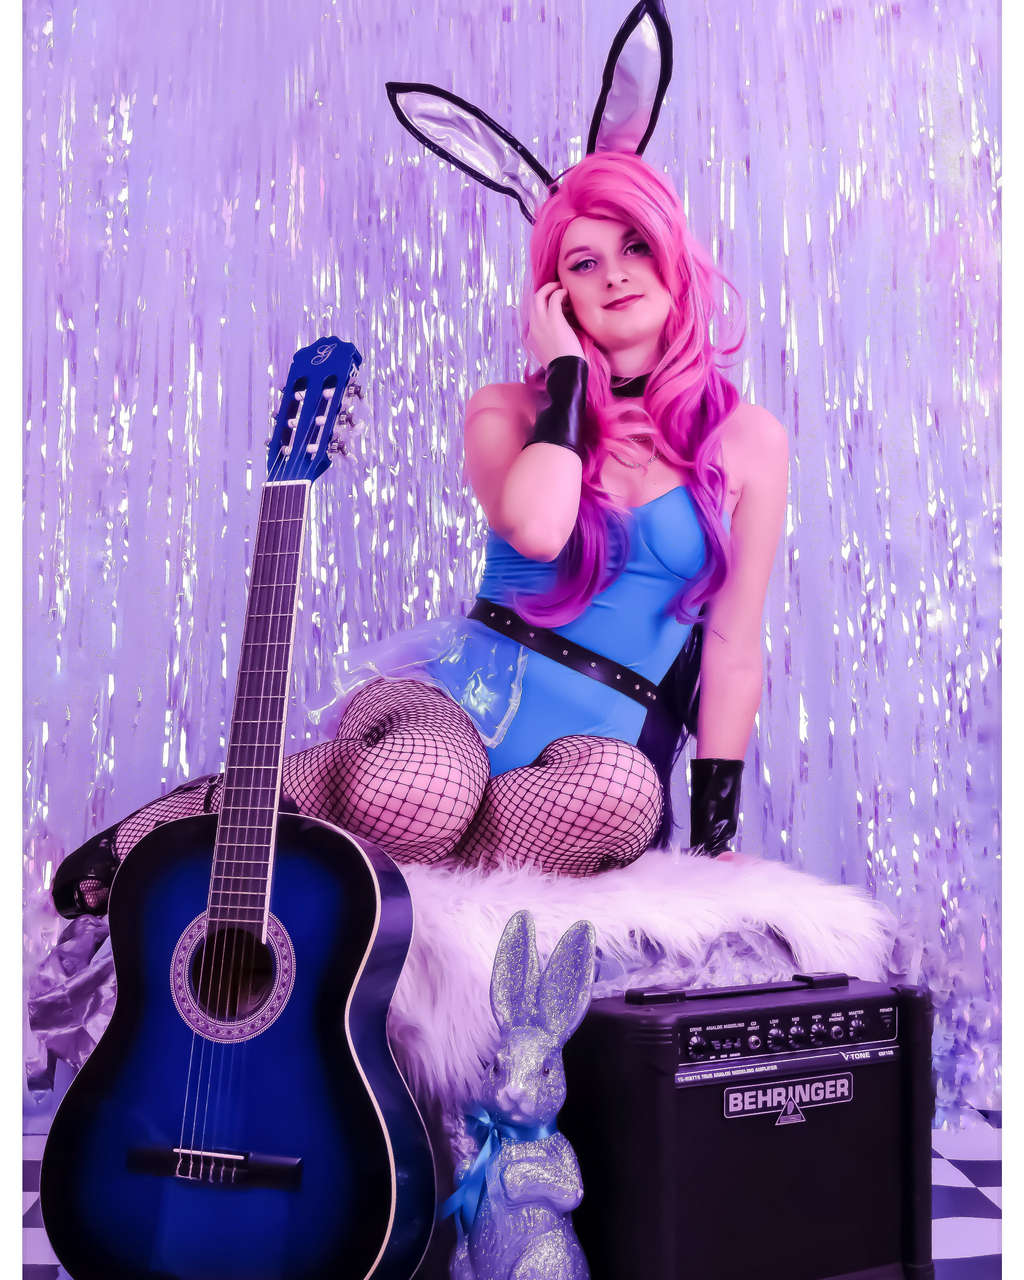 Seraphine Bunny Cosplay By M